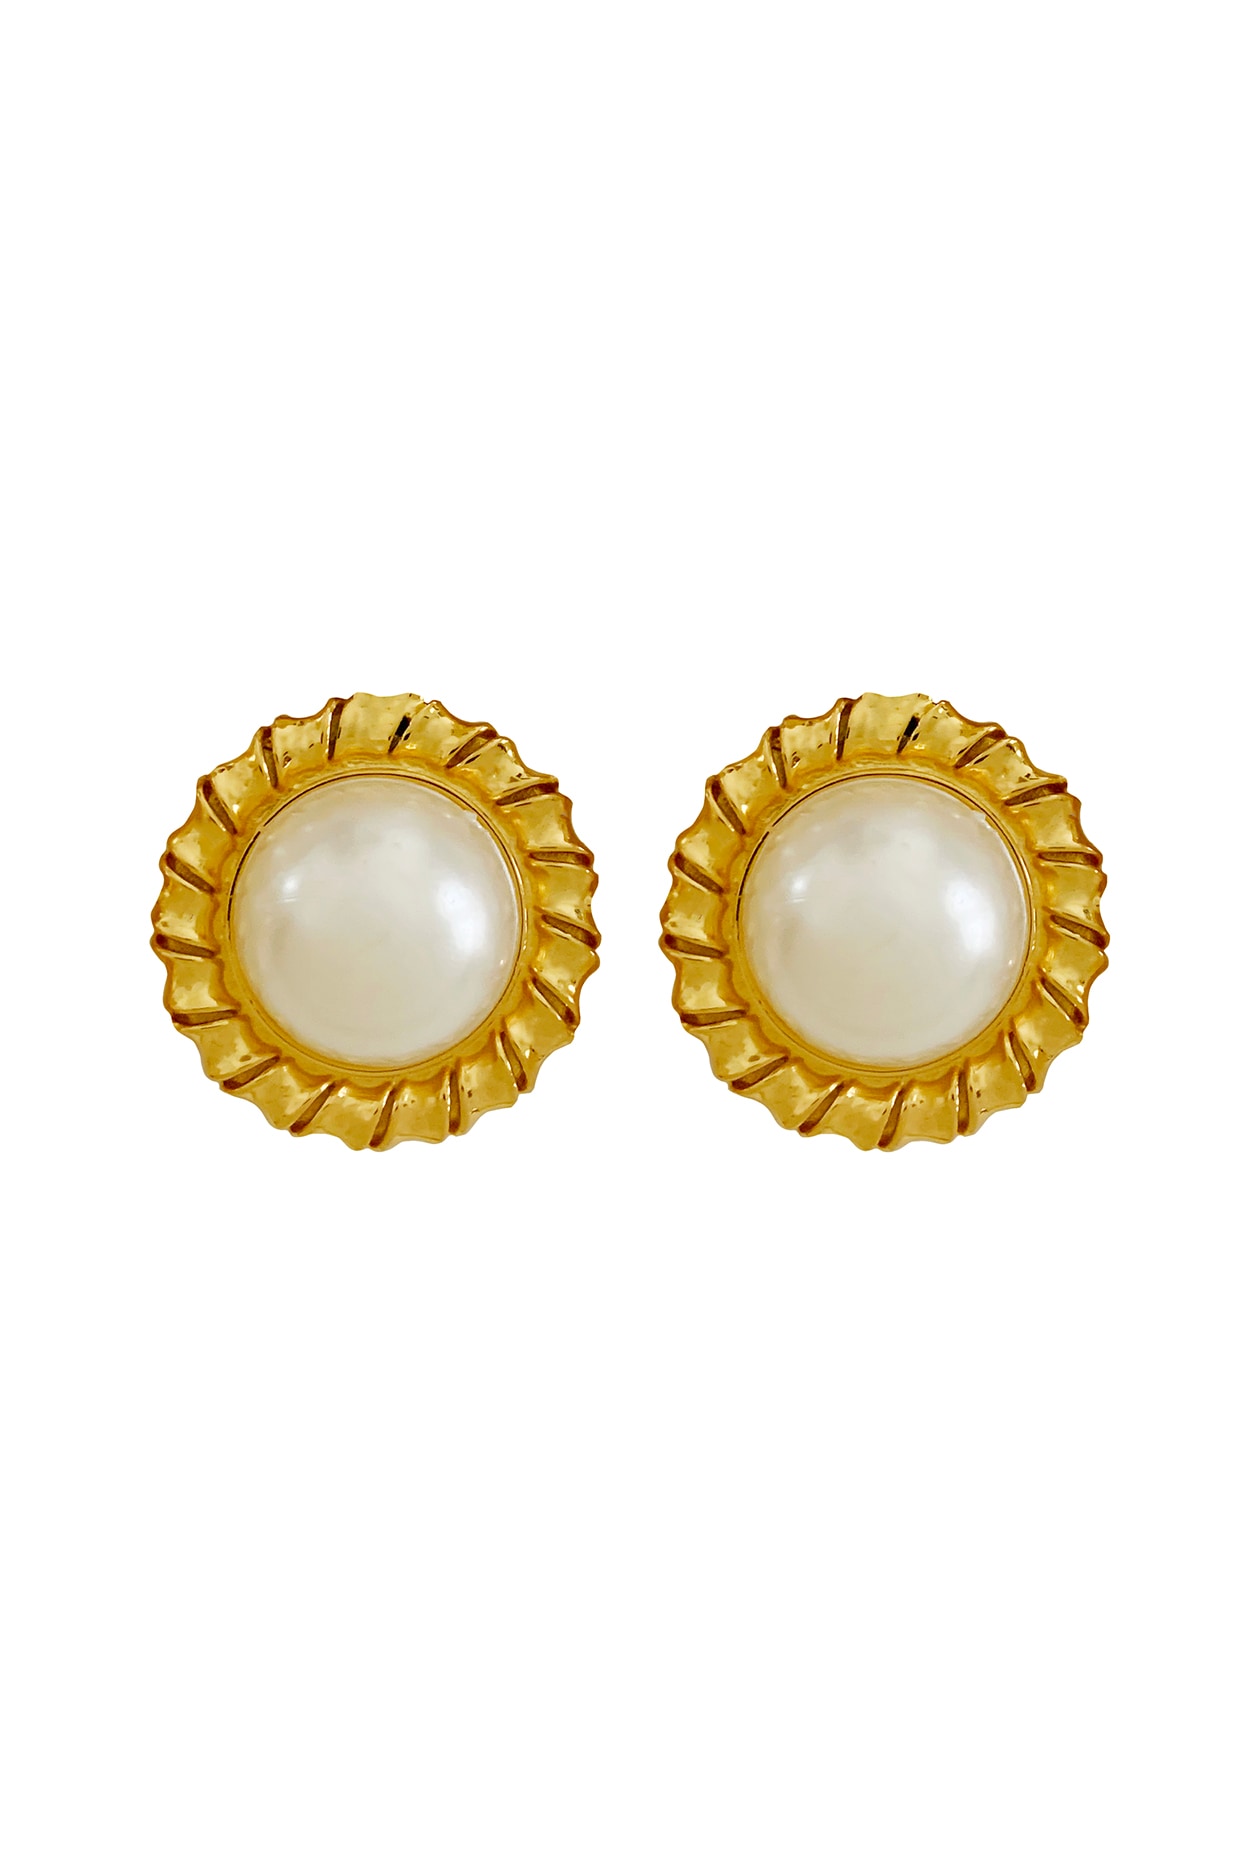 Antique Edwardian Opal Pearl Cluster Stud Earrings 9ct Gold – Jewellery  Addiction